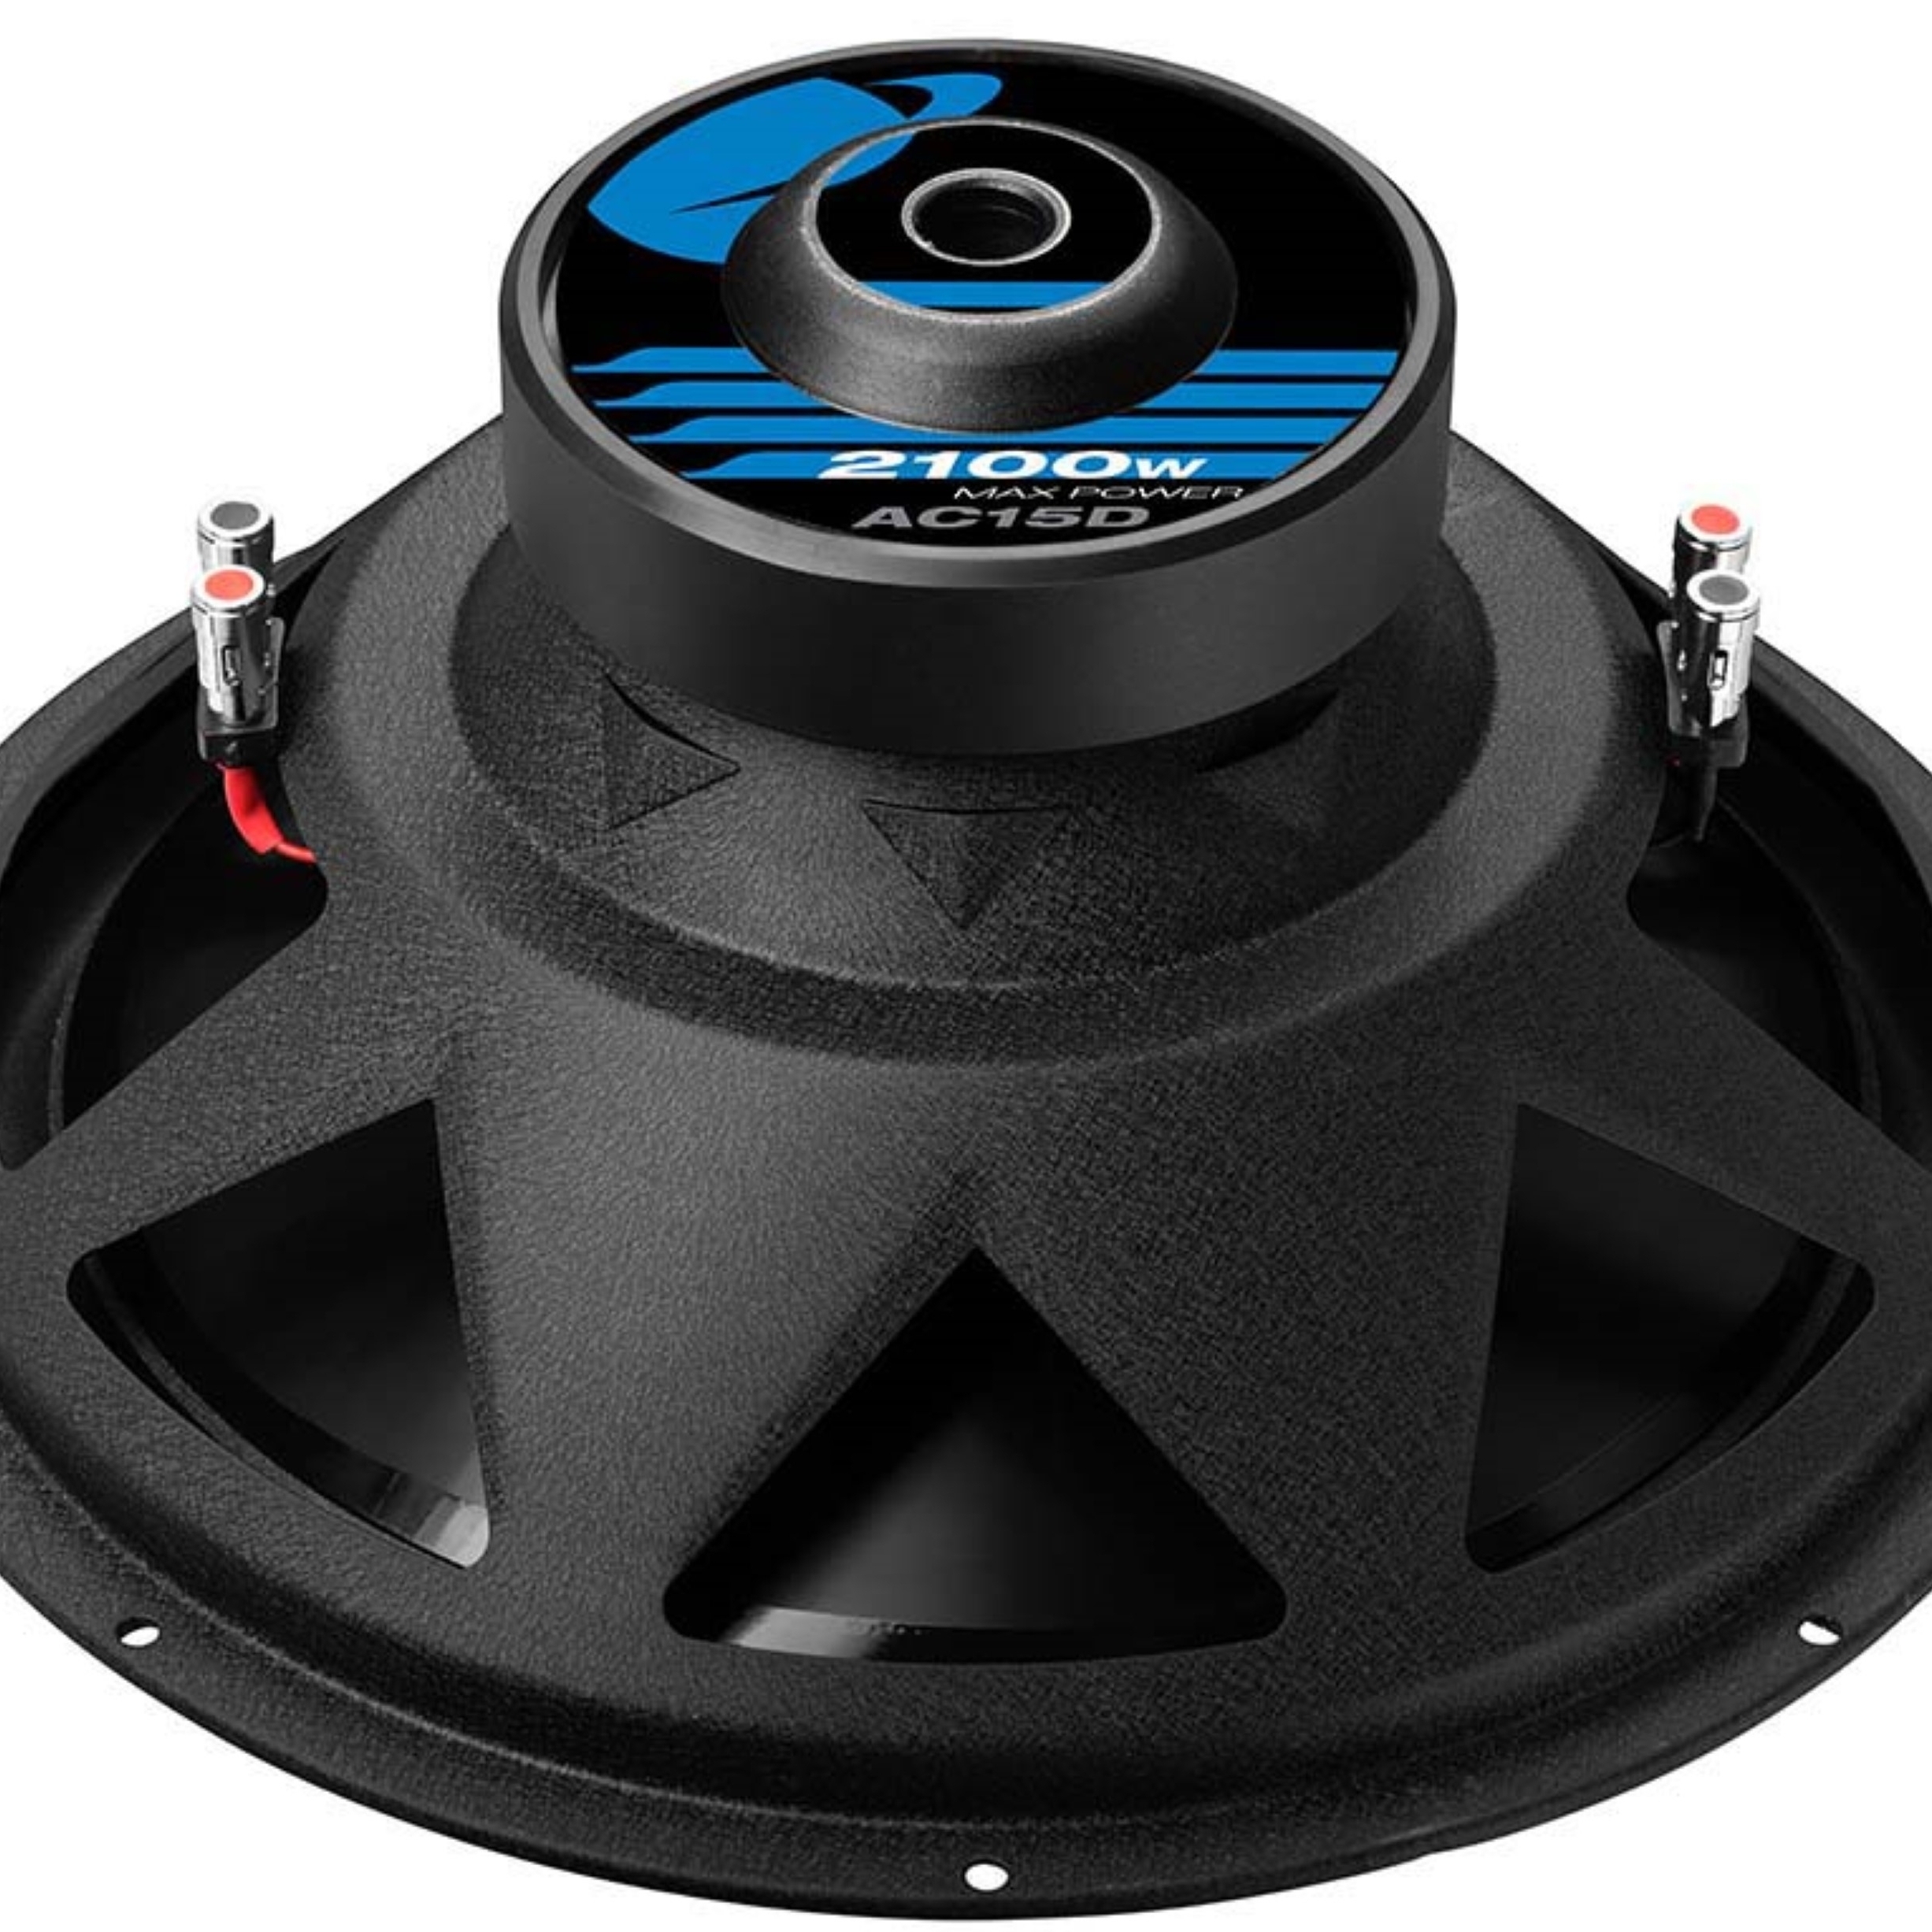 Planet Audio Anarchy Series 15 Inch Car Audio Subwoofer